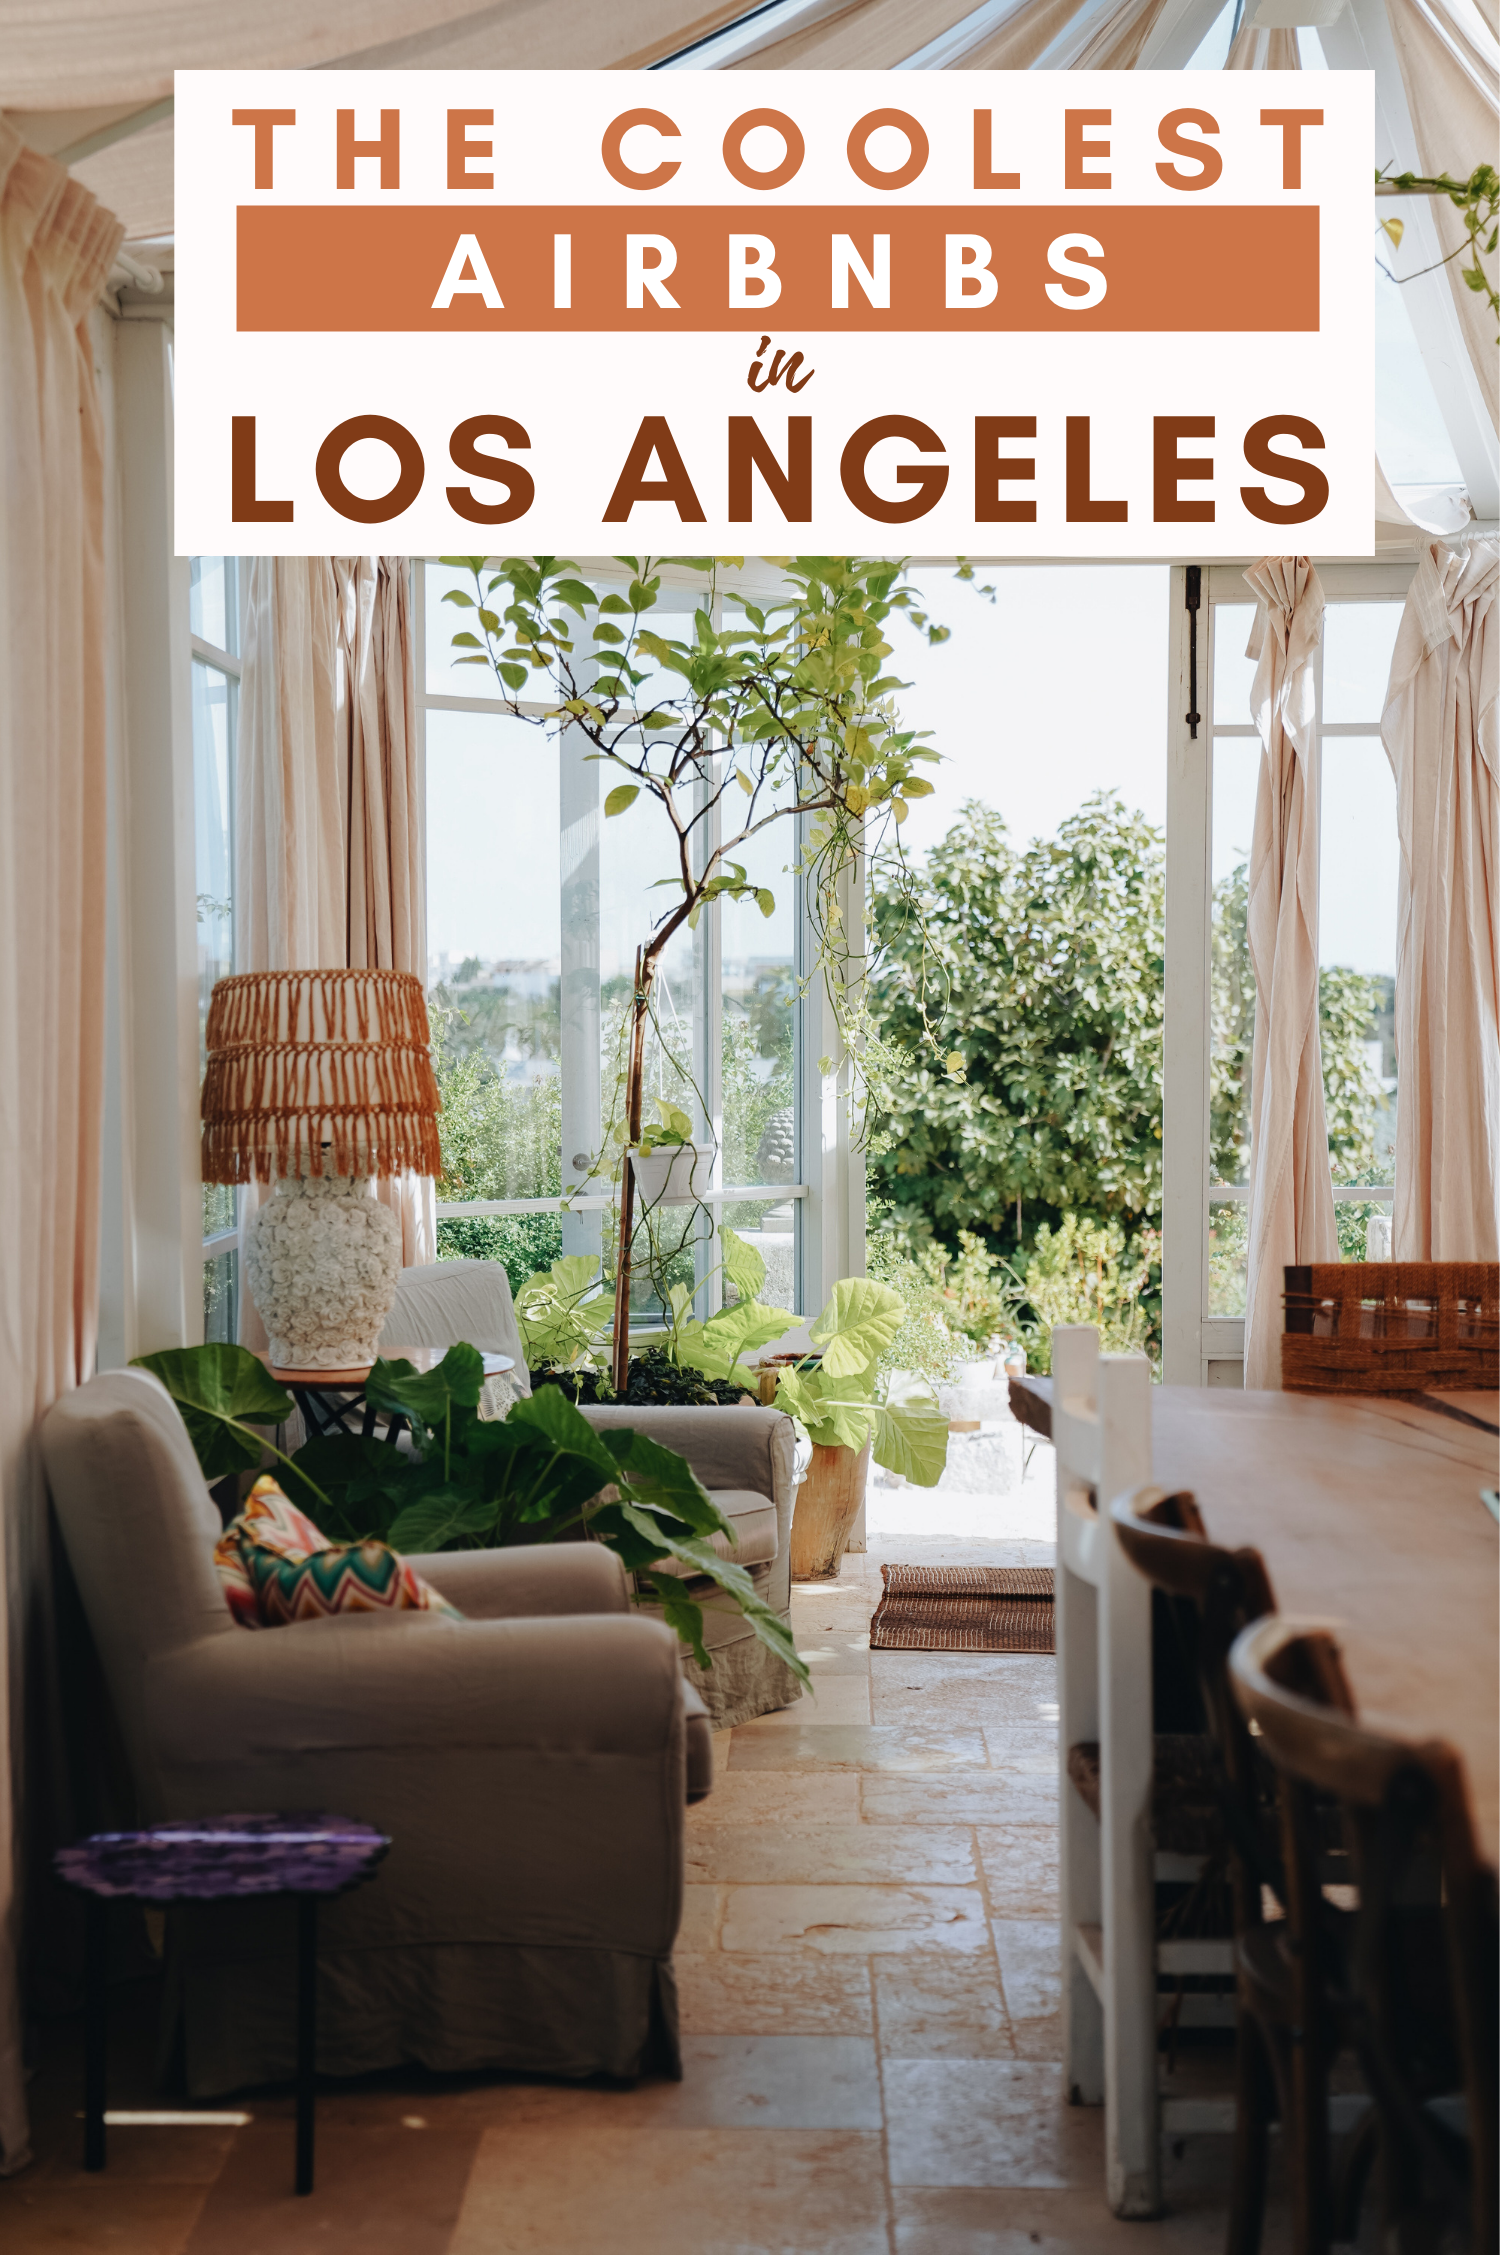 The coolest Airbnbs in Los Angeles